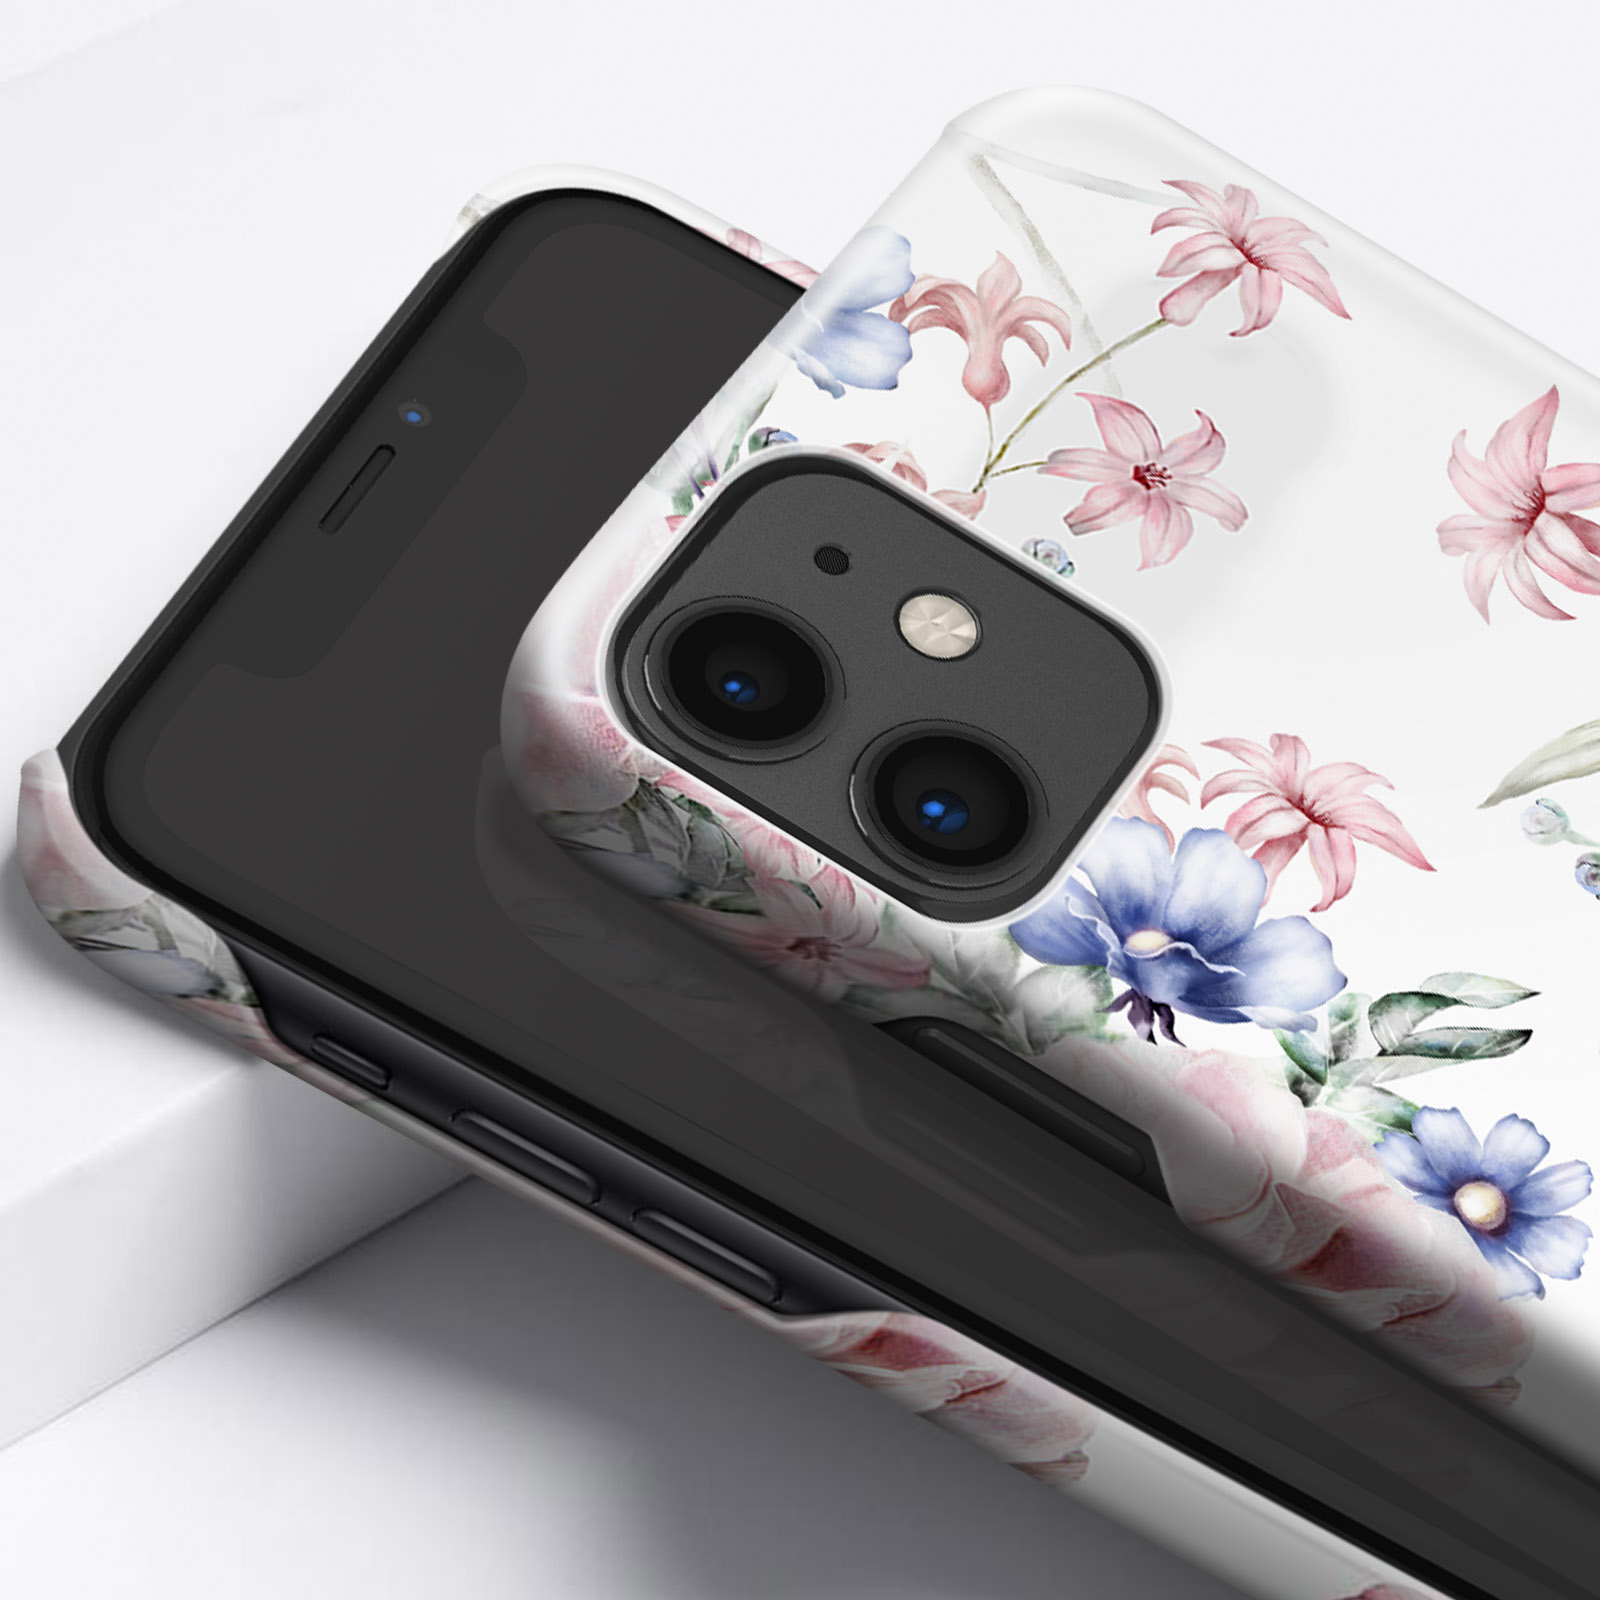 IDEAL OF SWEDEN IDFCS17-I1961-58, 11, iPhone XR, Backcover, Apple, Floral iPhone Romance